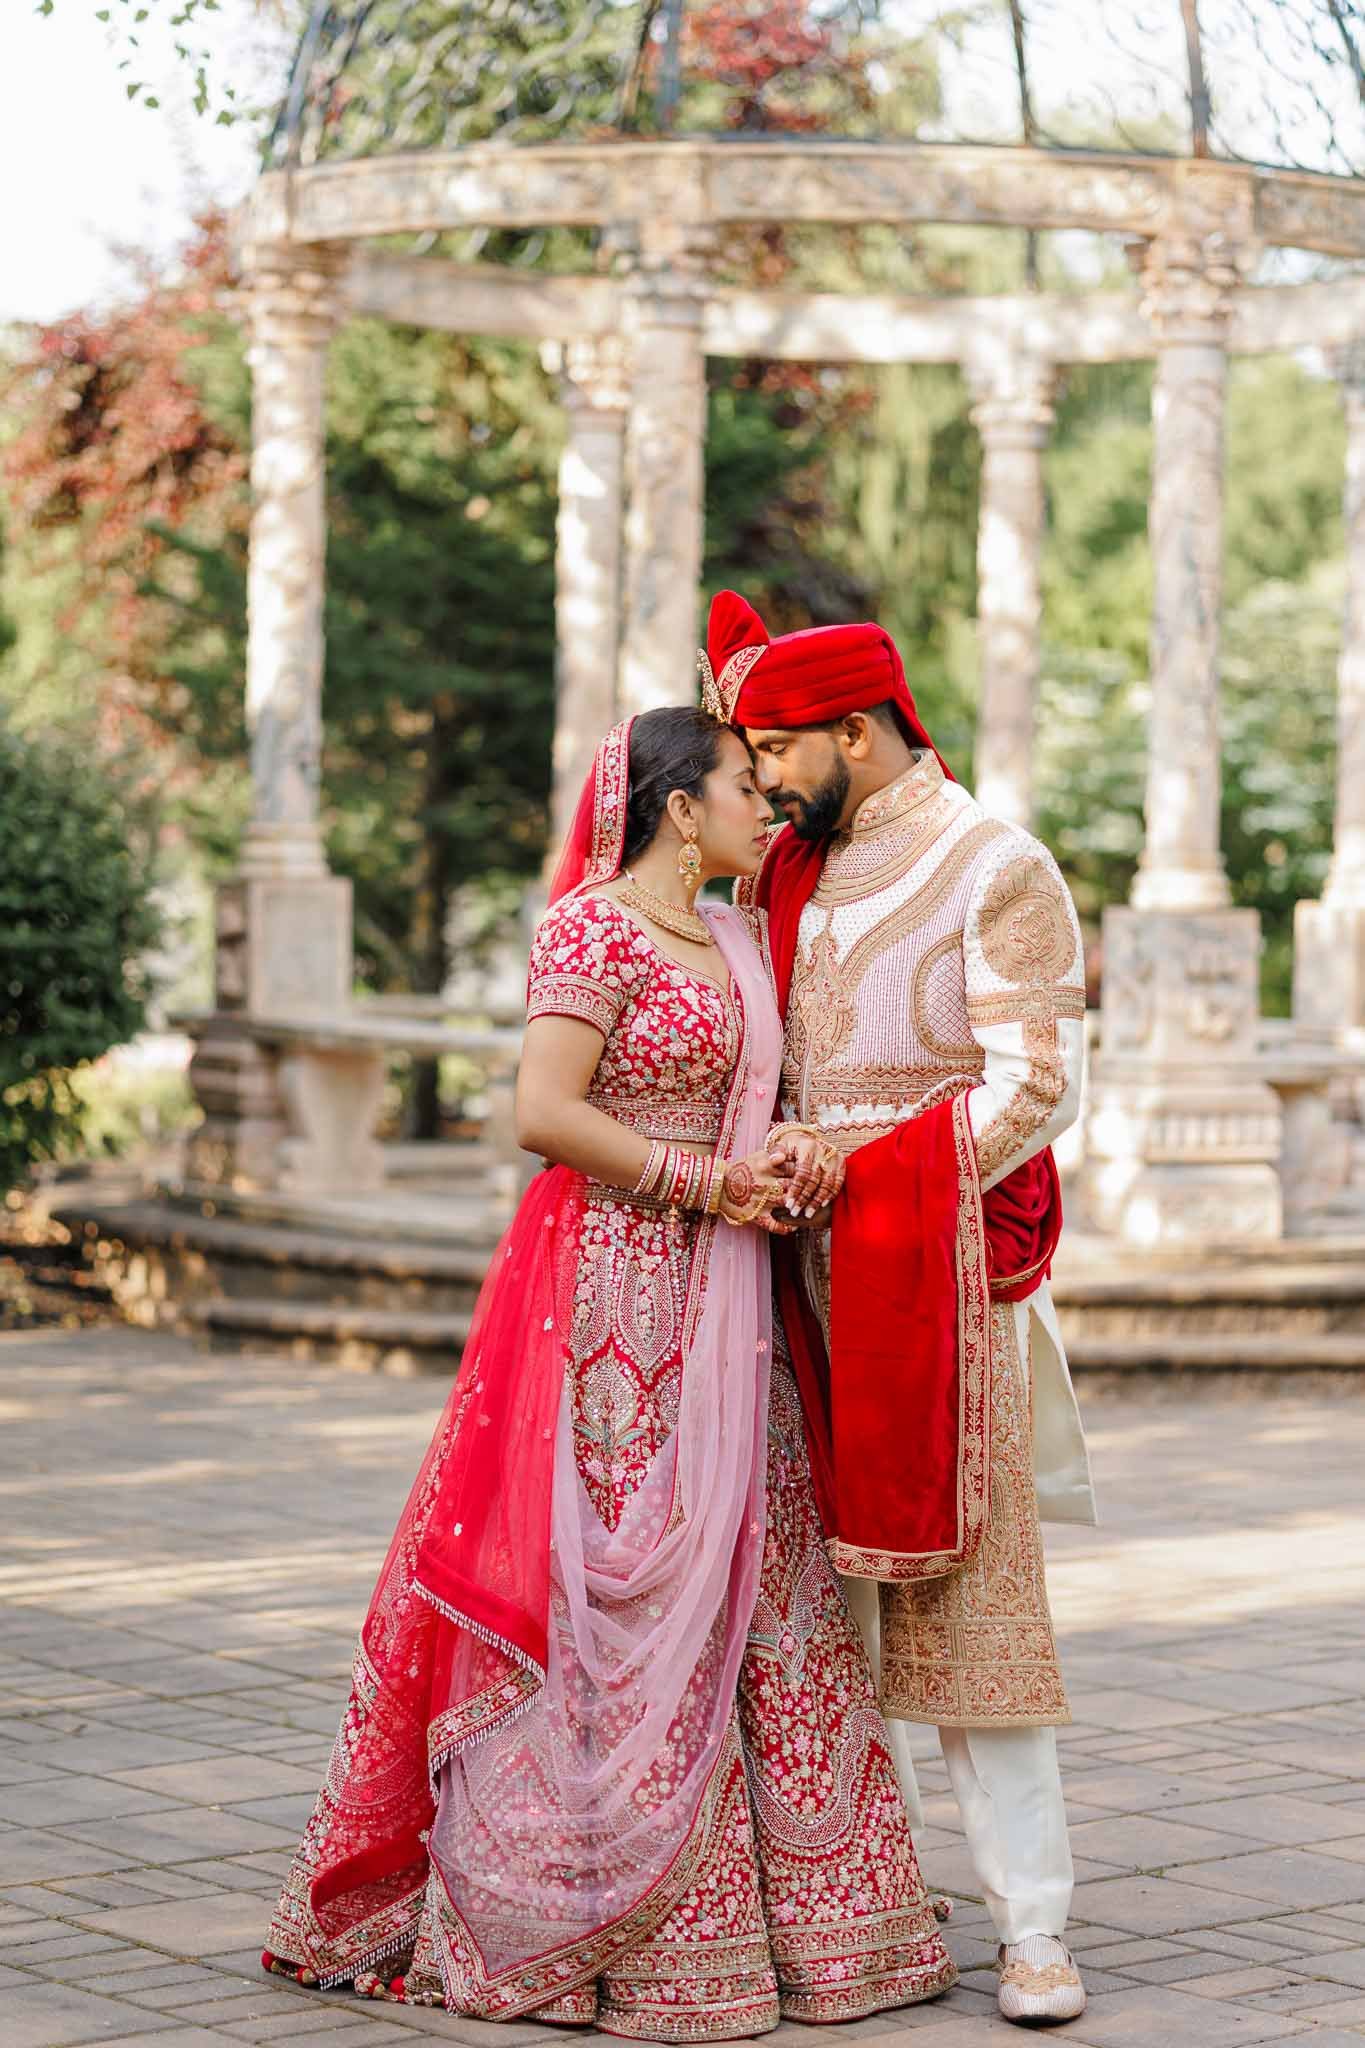 Indian wedding photography of Bride and Groom